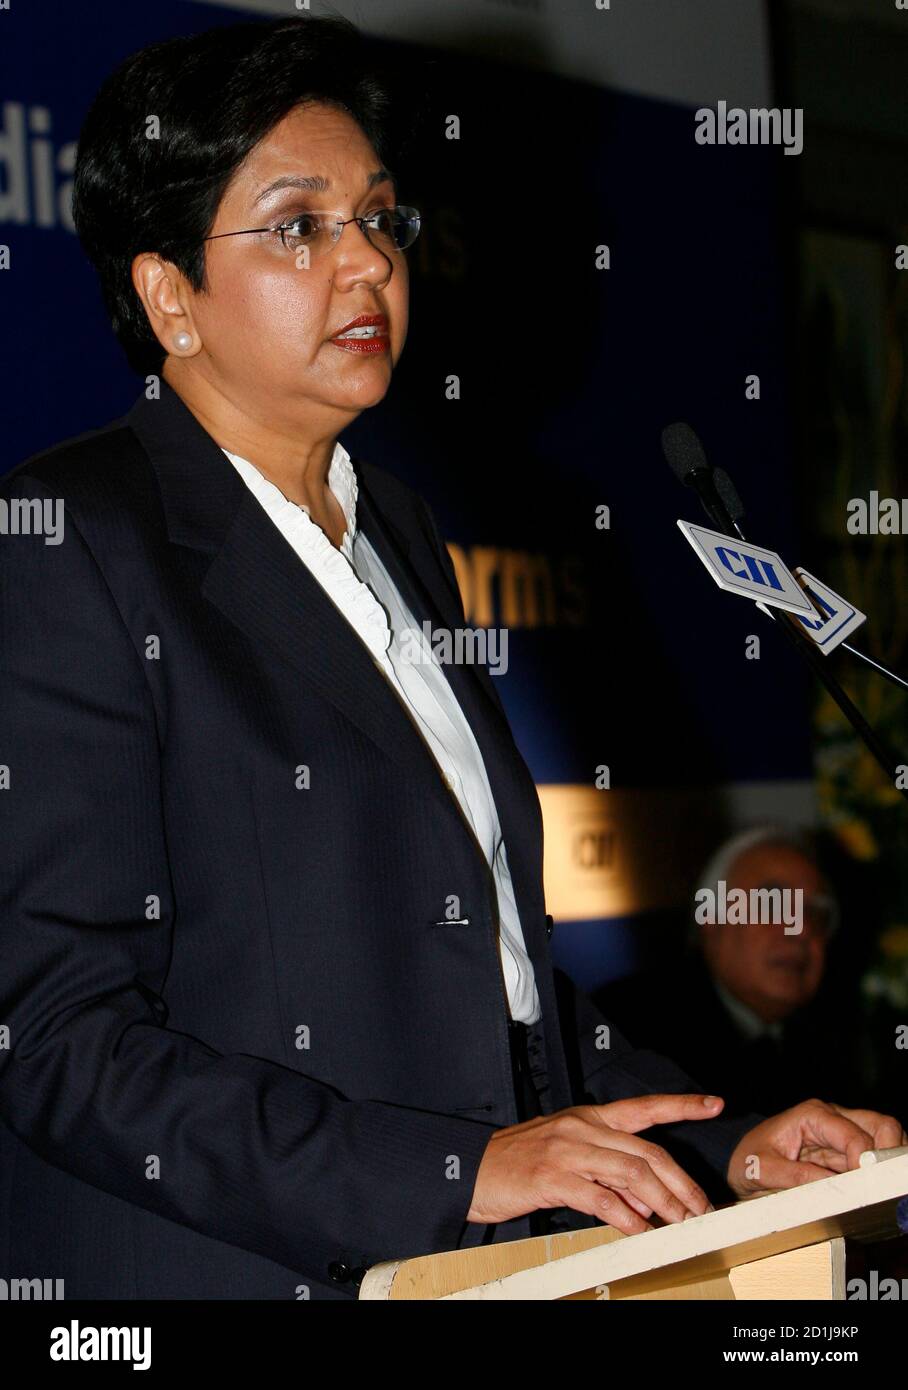 Indra Nooyi, chairman and chief executive officer of PepsiCo, speaks during a business meeting organised by the Confederation of Indian Industry (CII) in New Delhi September 24, 2008. REUTERS/B Mathur (INDIA) Stock Photo